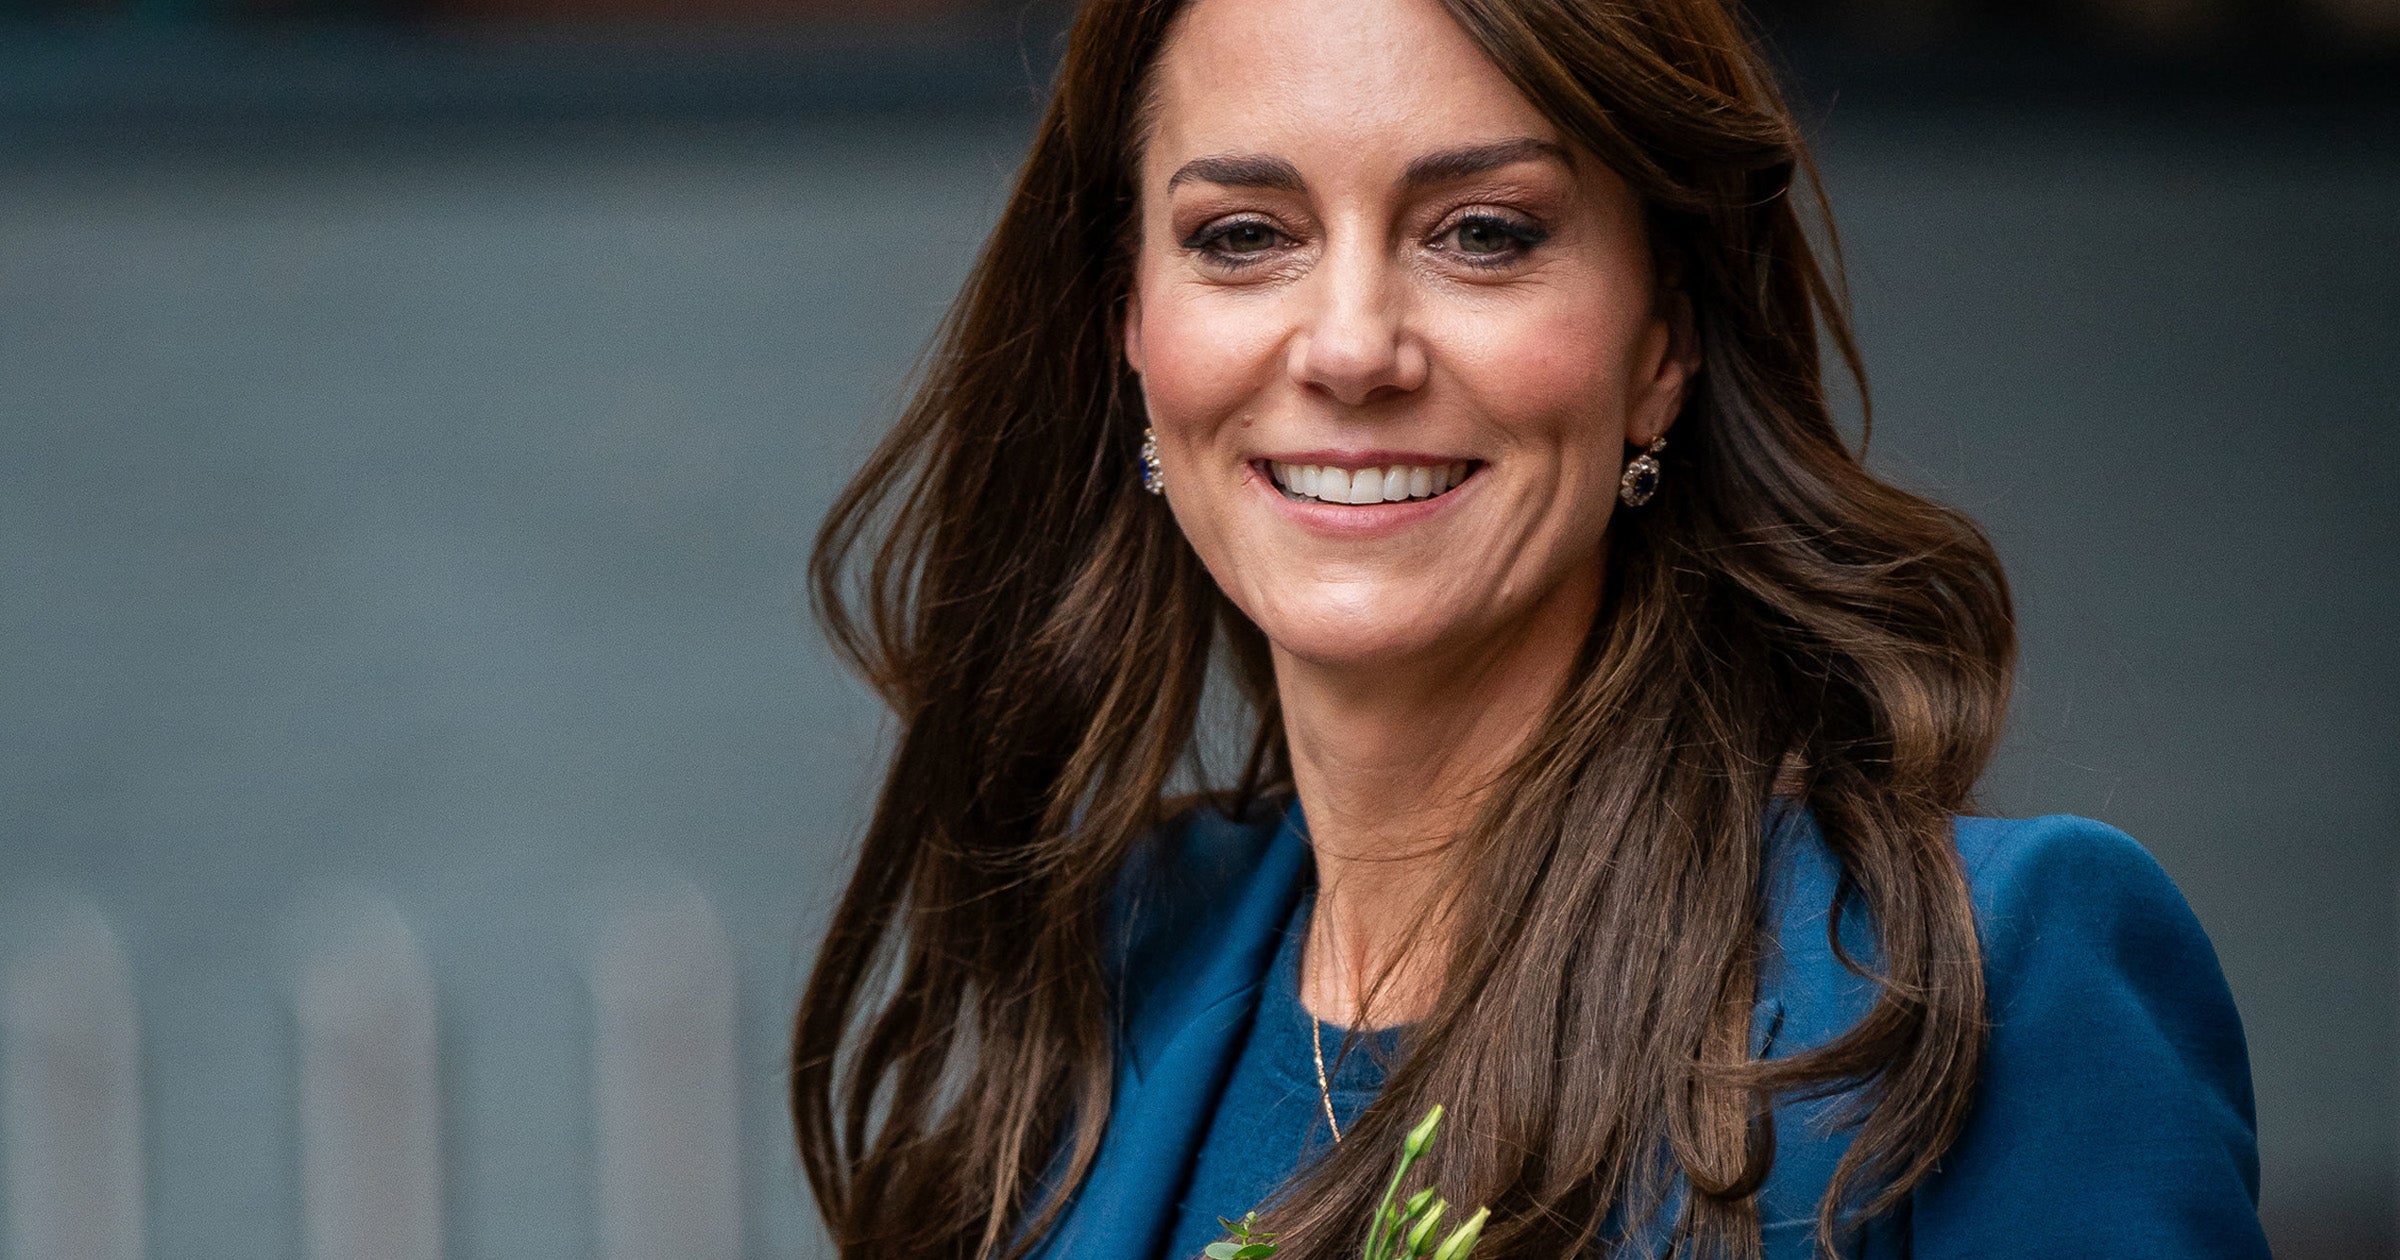 Kate Middleton's sapphire engagement ring has a romantic history, having  previously belonged to Princess Diana - Cambridgeshire Live